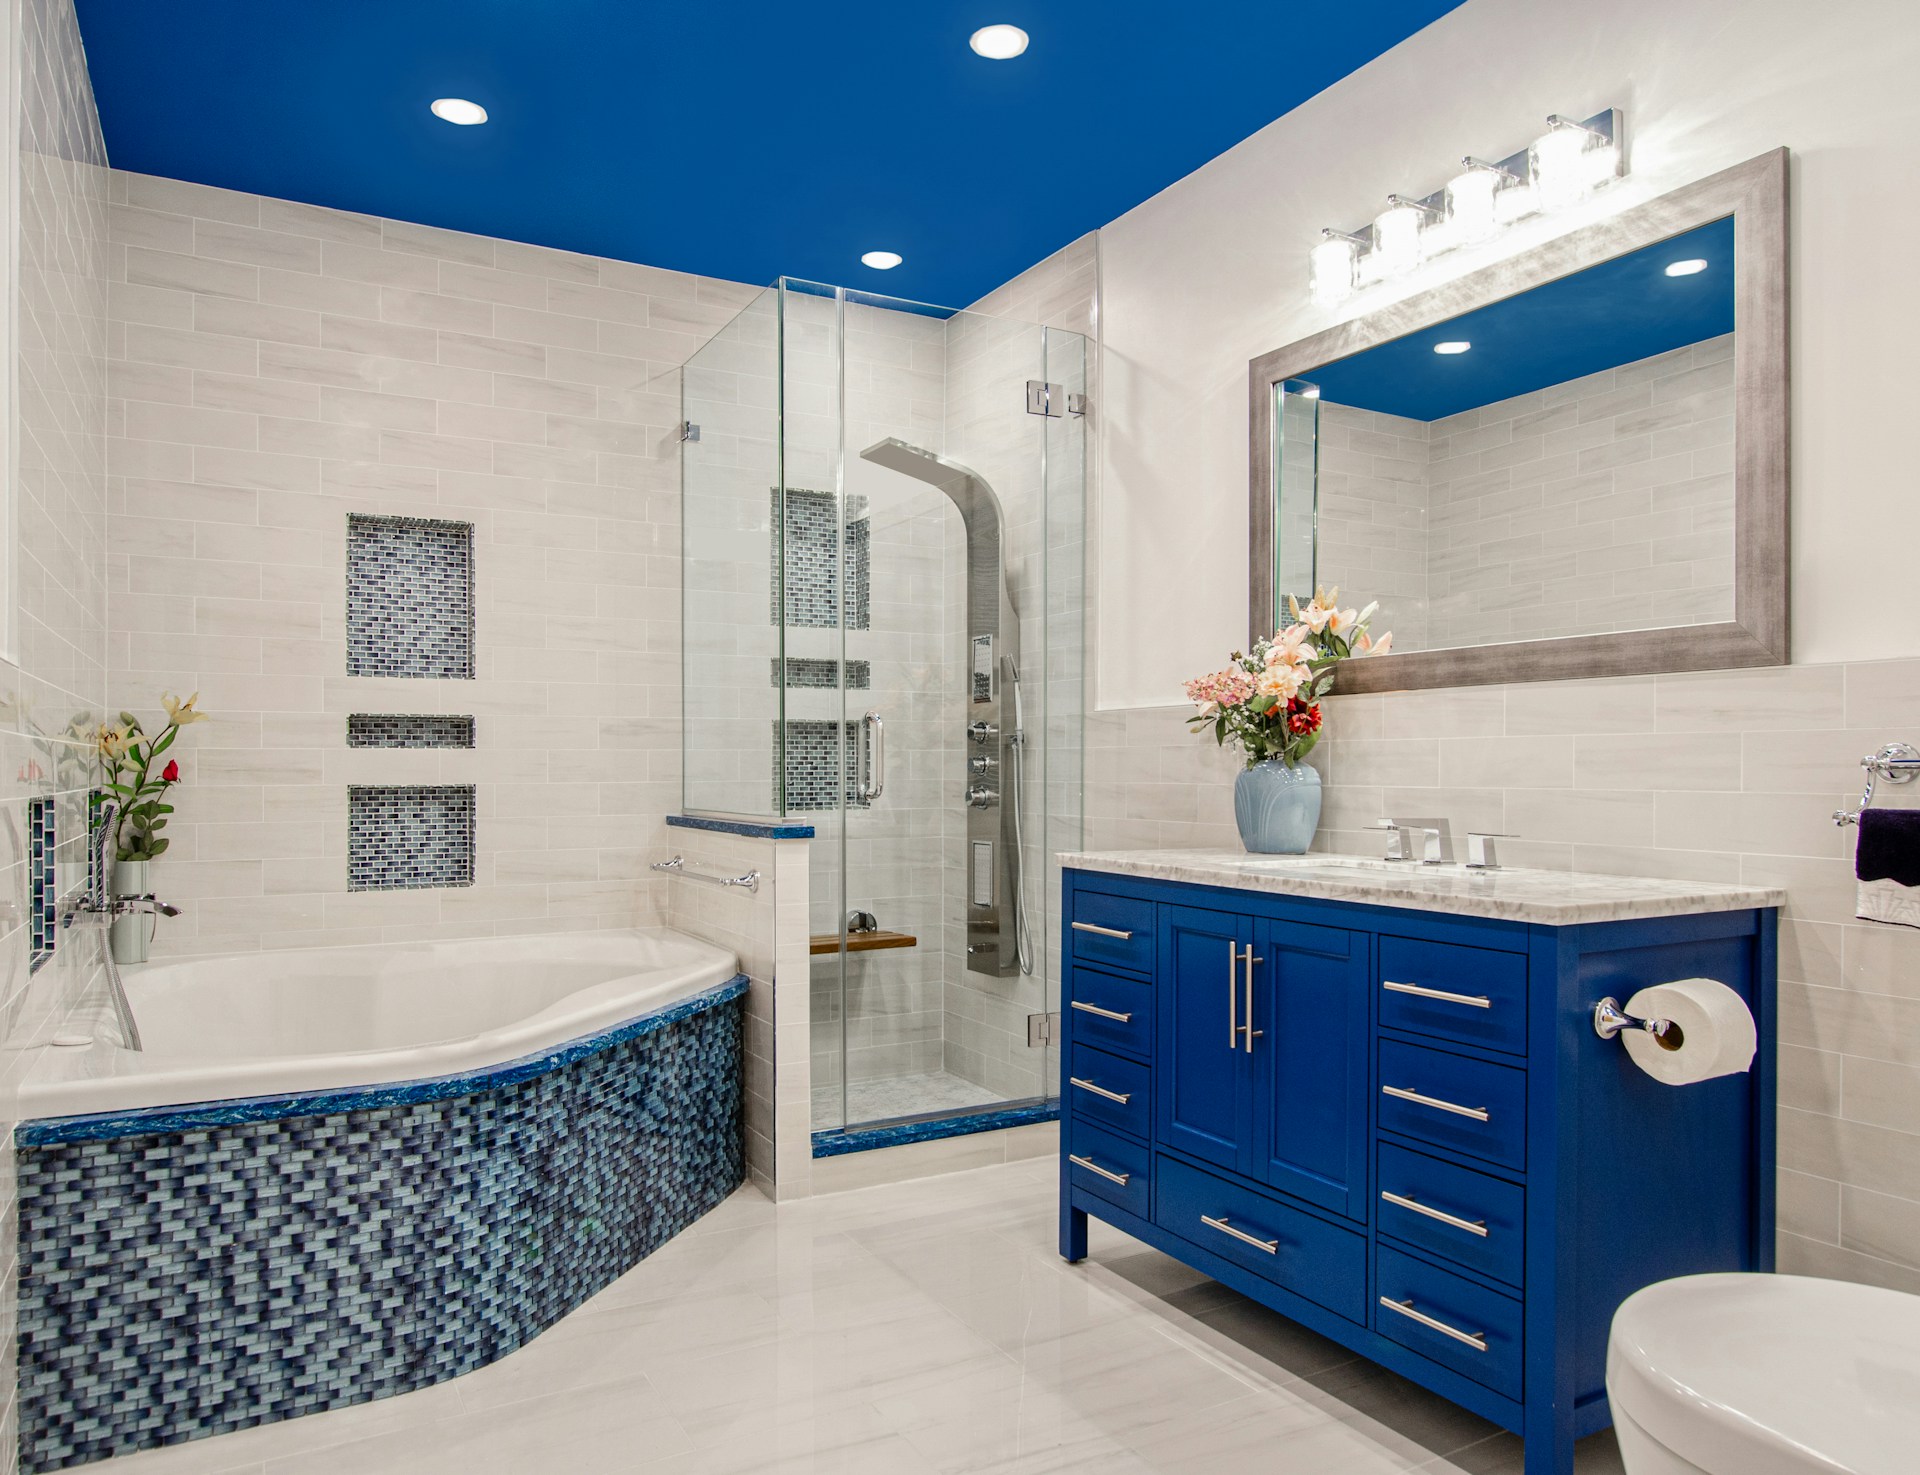 Six Ways to Instantly Make Your Bathroom Feel More Luxurious